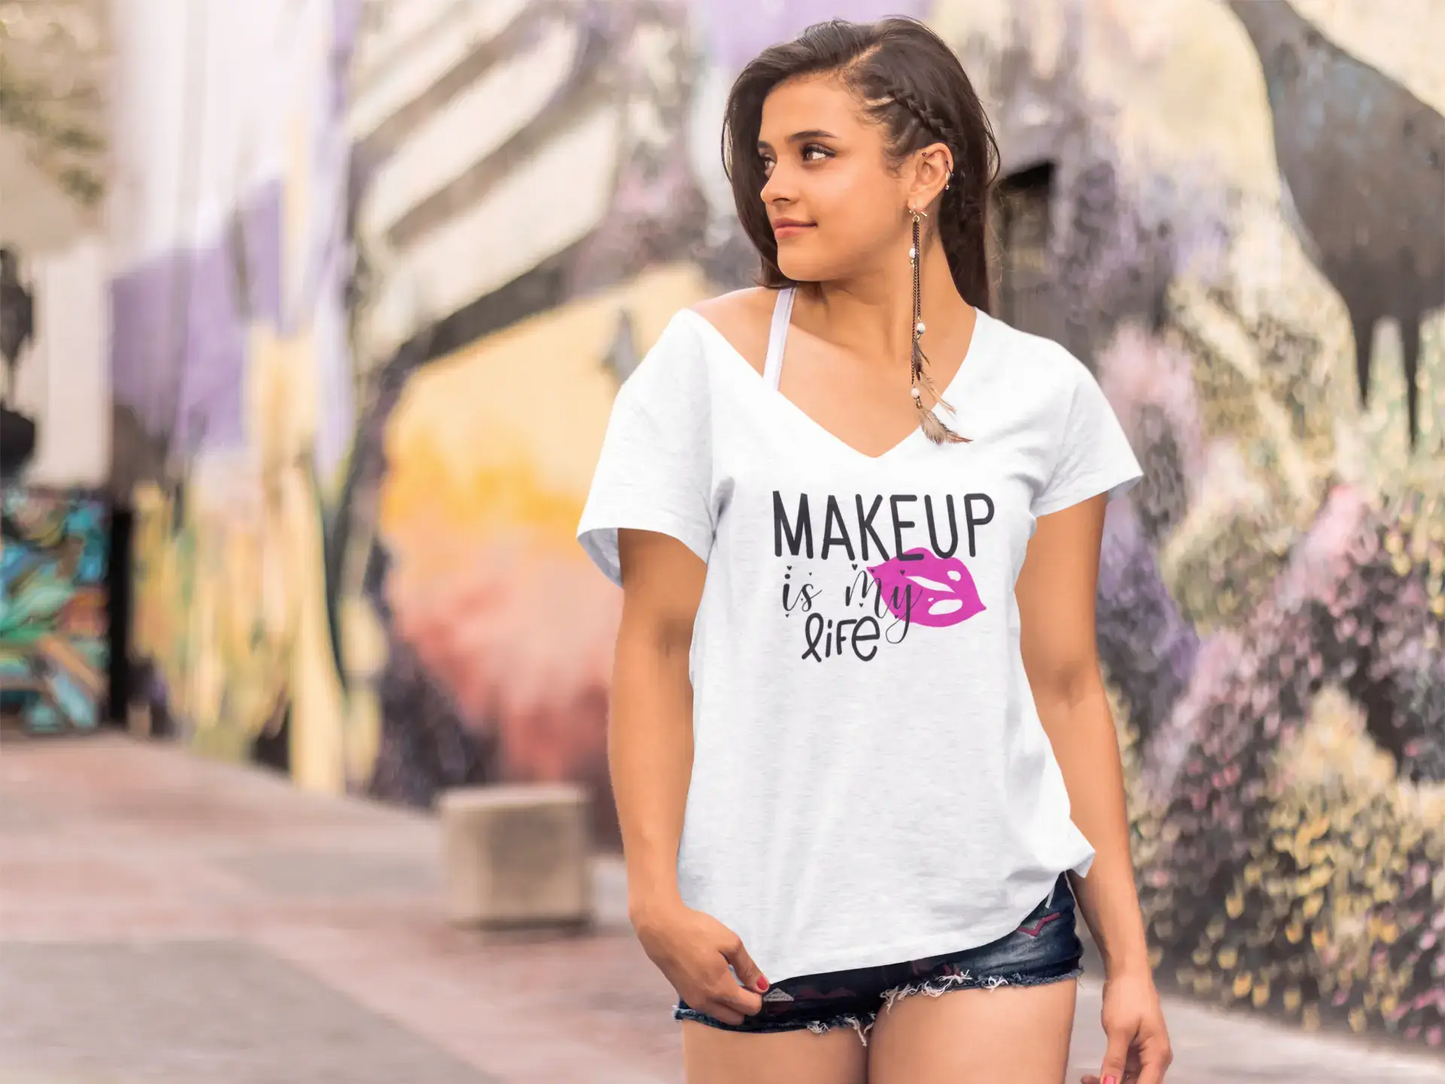 ULTRABASIC Women's Novelty T-Shirt Make Up is My Life - Funny Girl's Quote